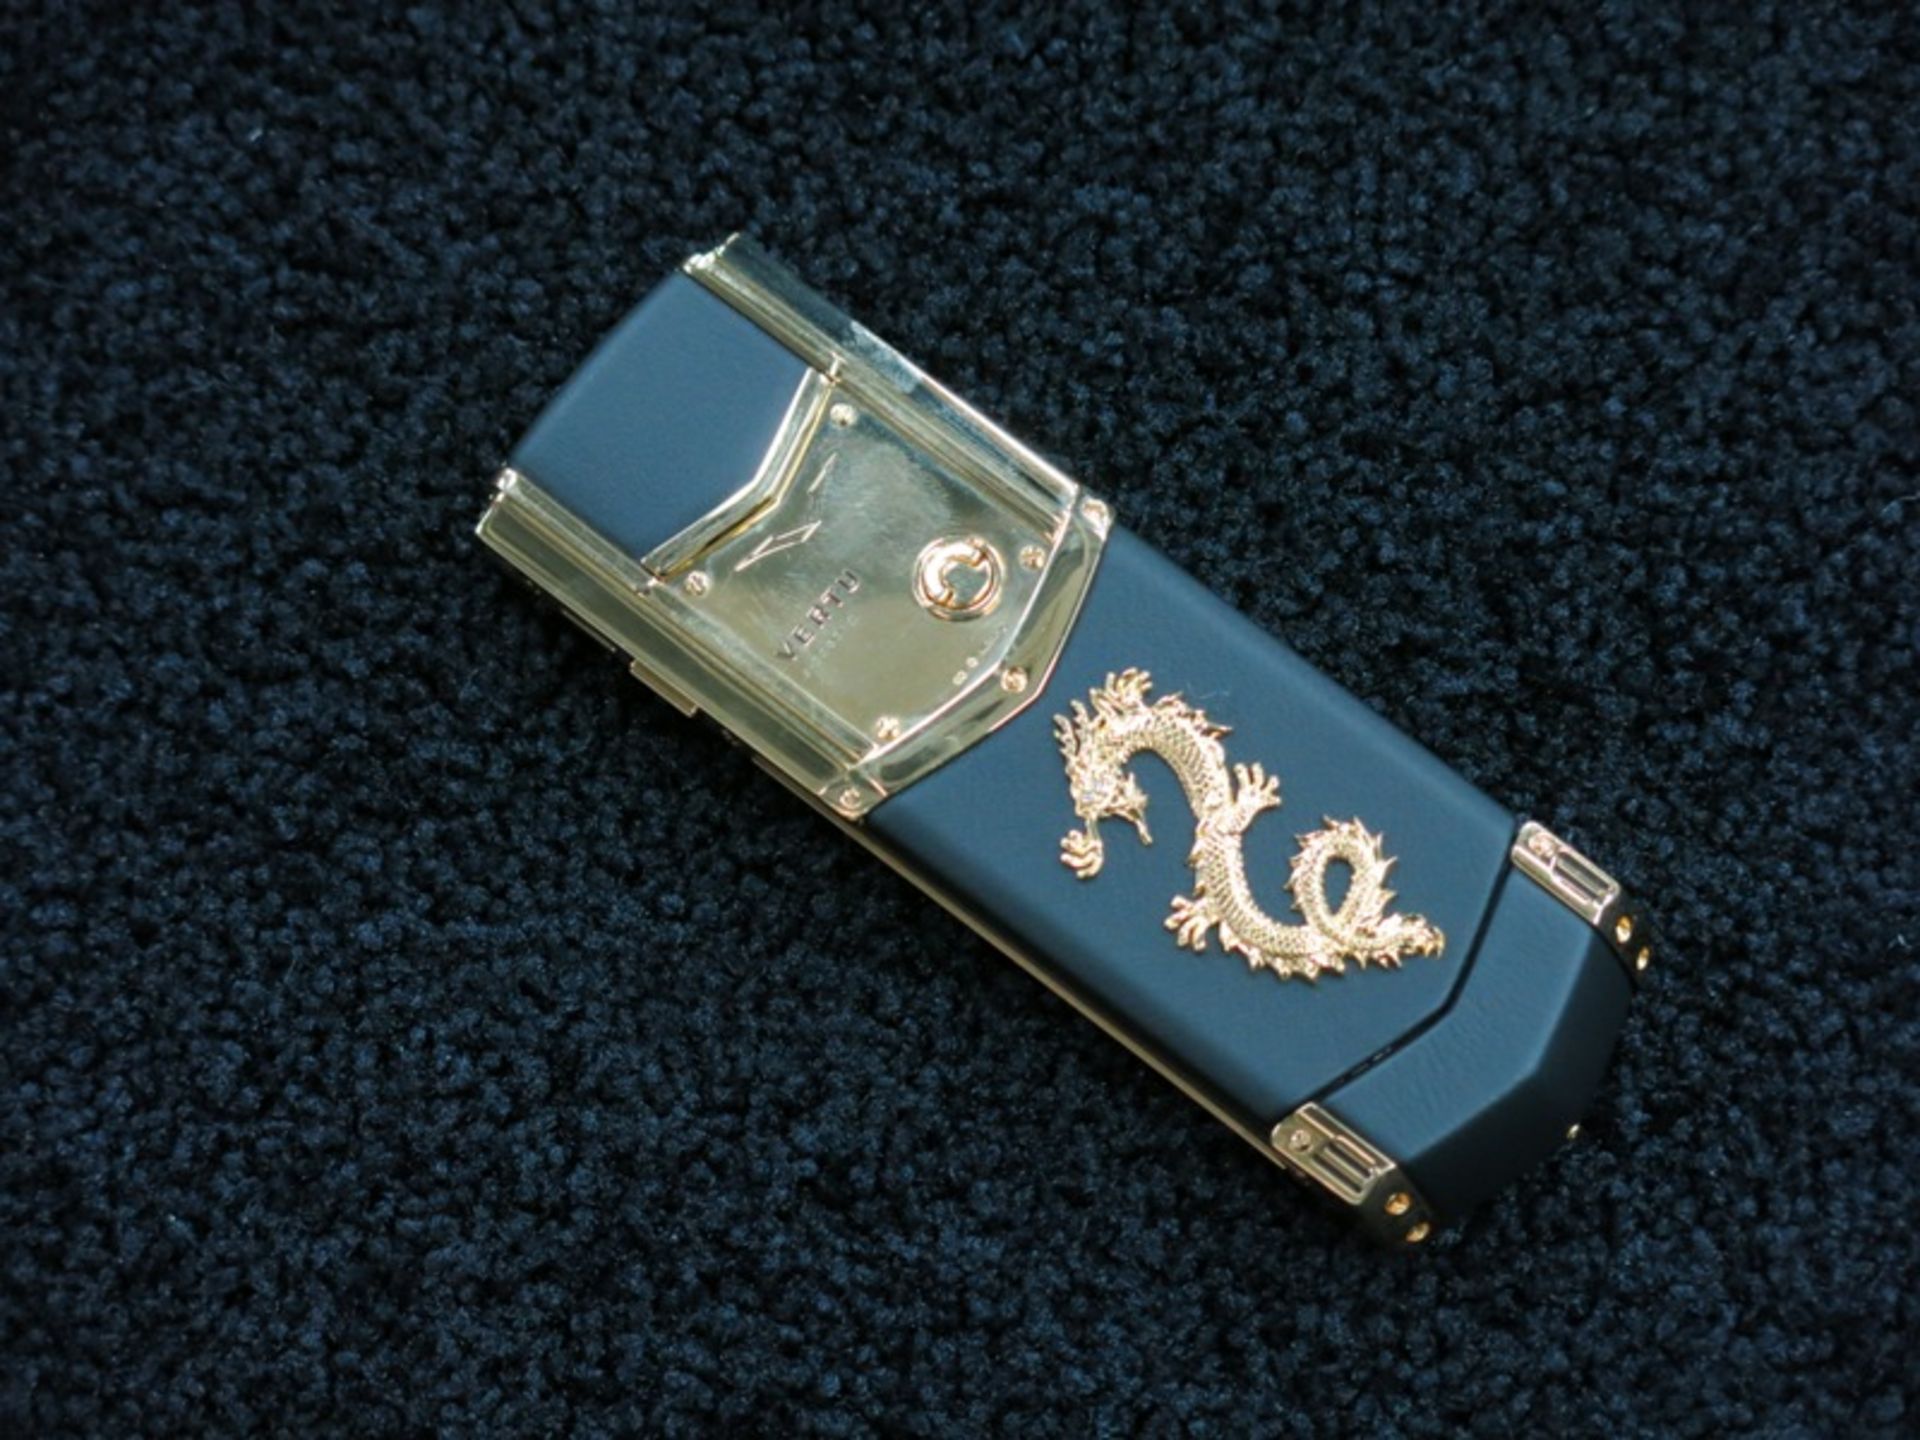 Vertu 18kt Yellow Gold Signature S Phone. Special Edition Dragon with Small Diamond Eyes & - Image 4 of 4